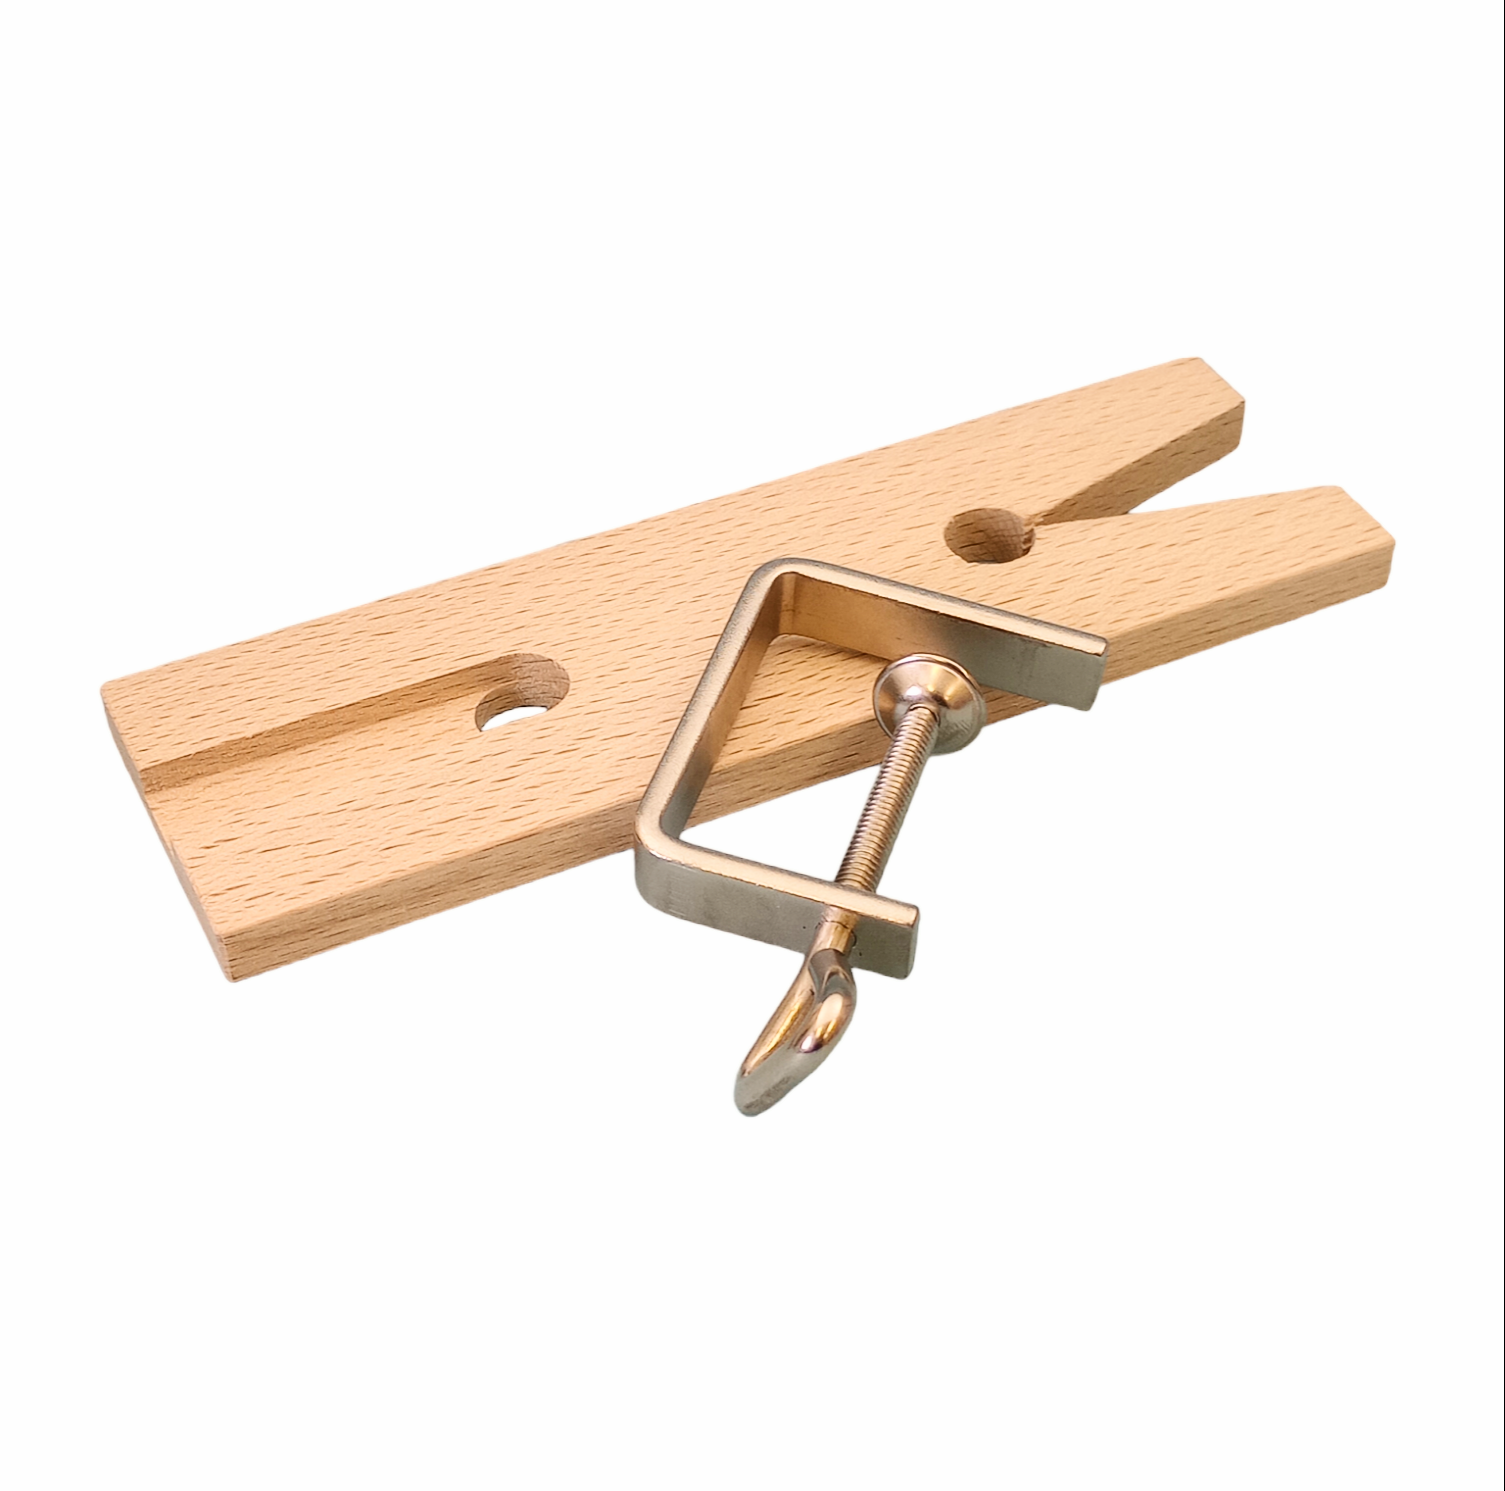 76001 V BLOCK TABLE EXTENSION & CLAMP